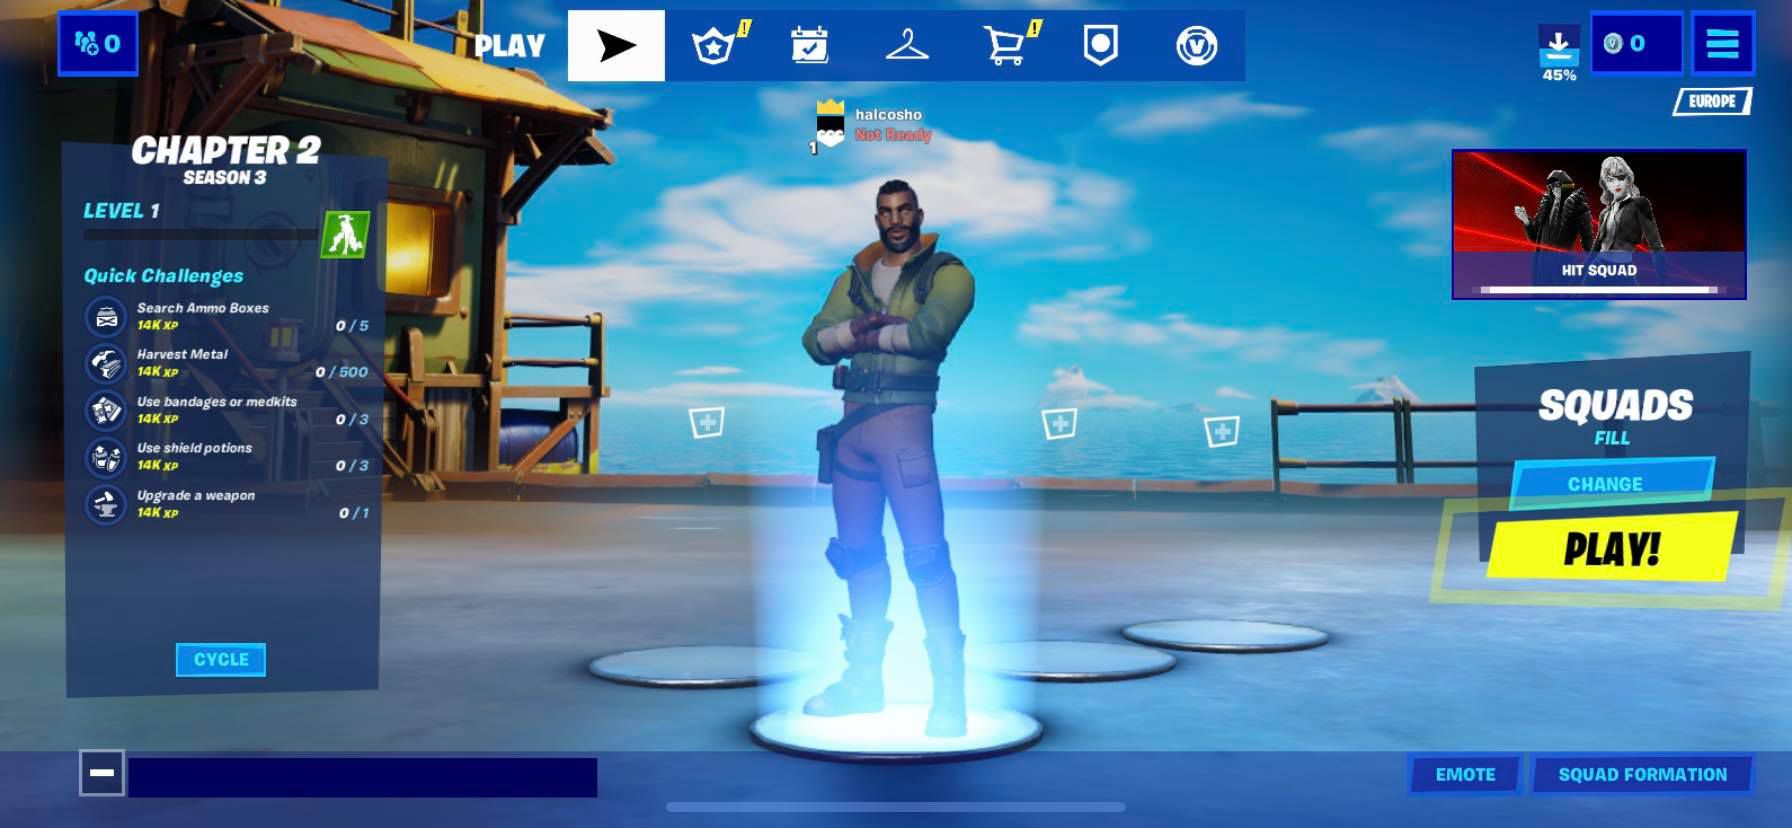 Download Fortnite for Android - Free - 28.01.0-30106568-Android